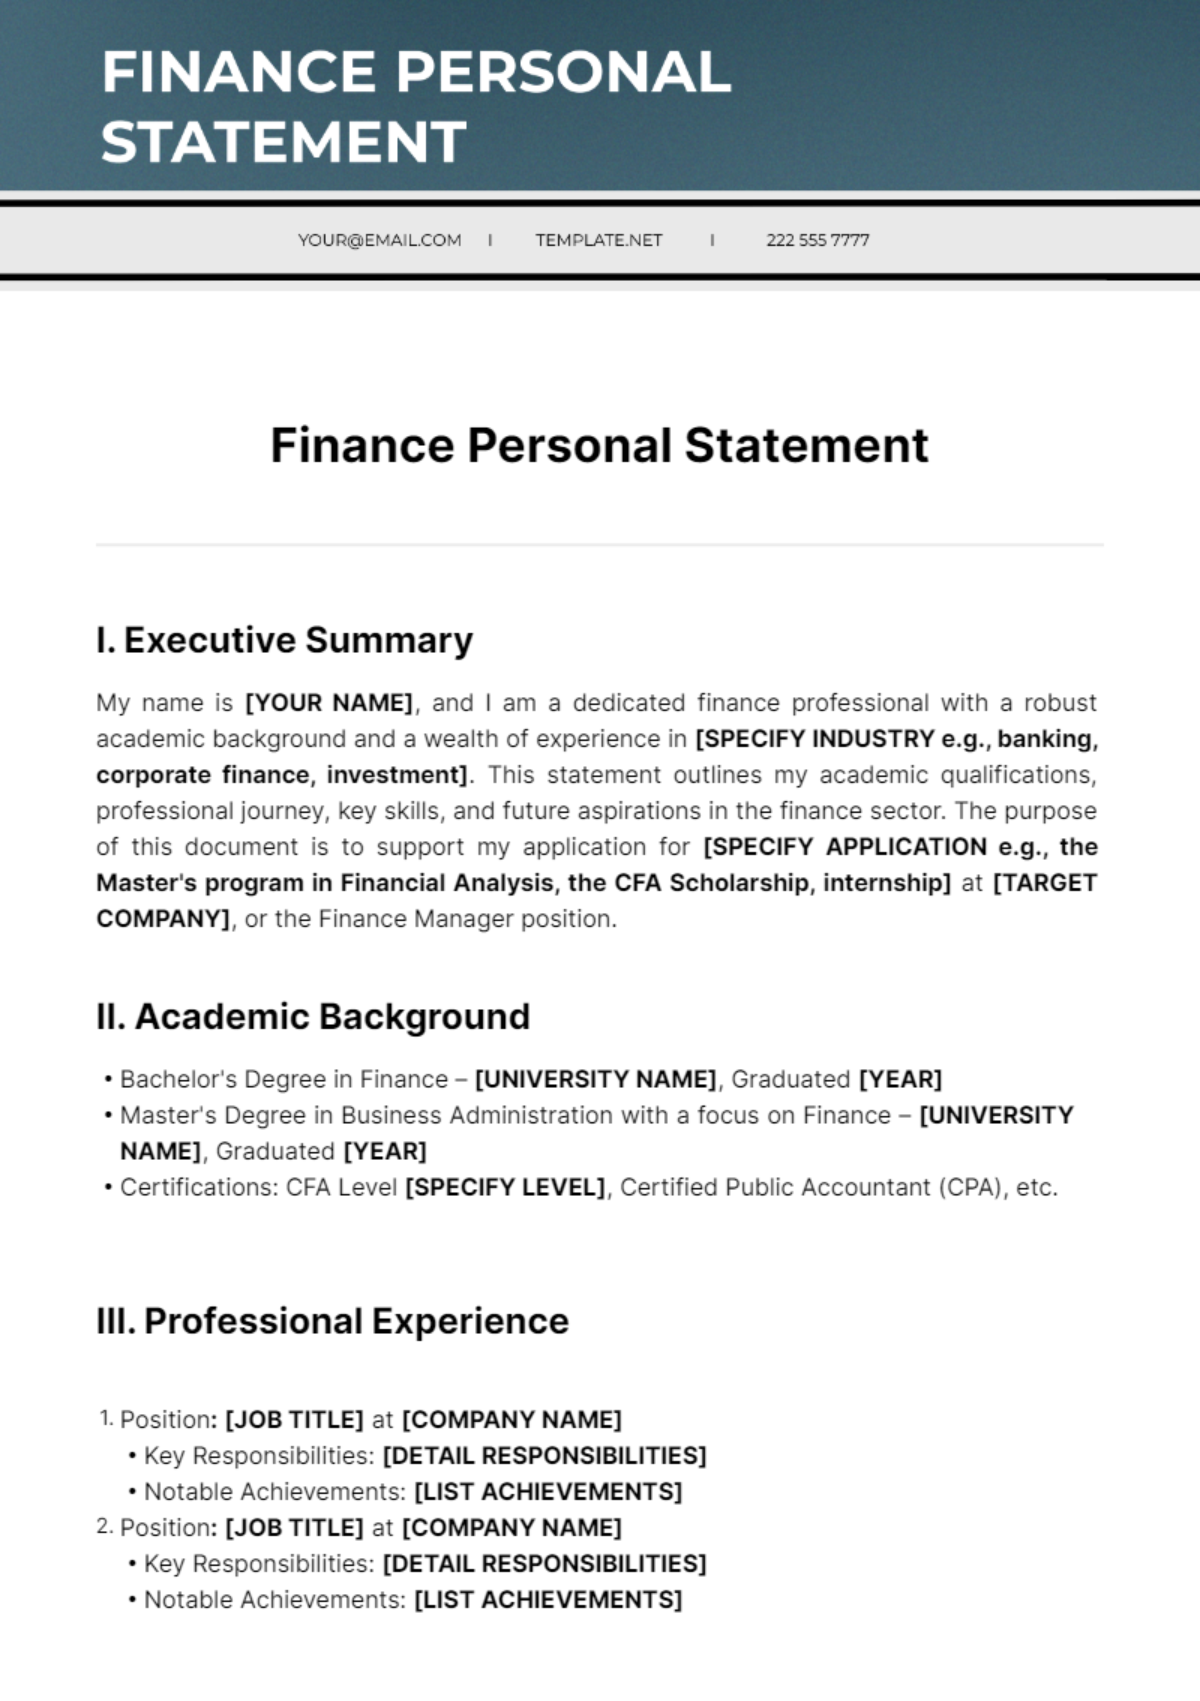 Finance Personal Statement Template